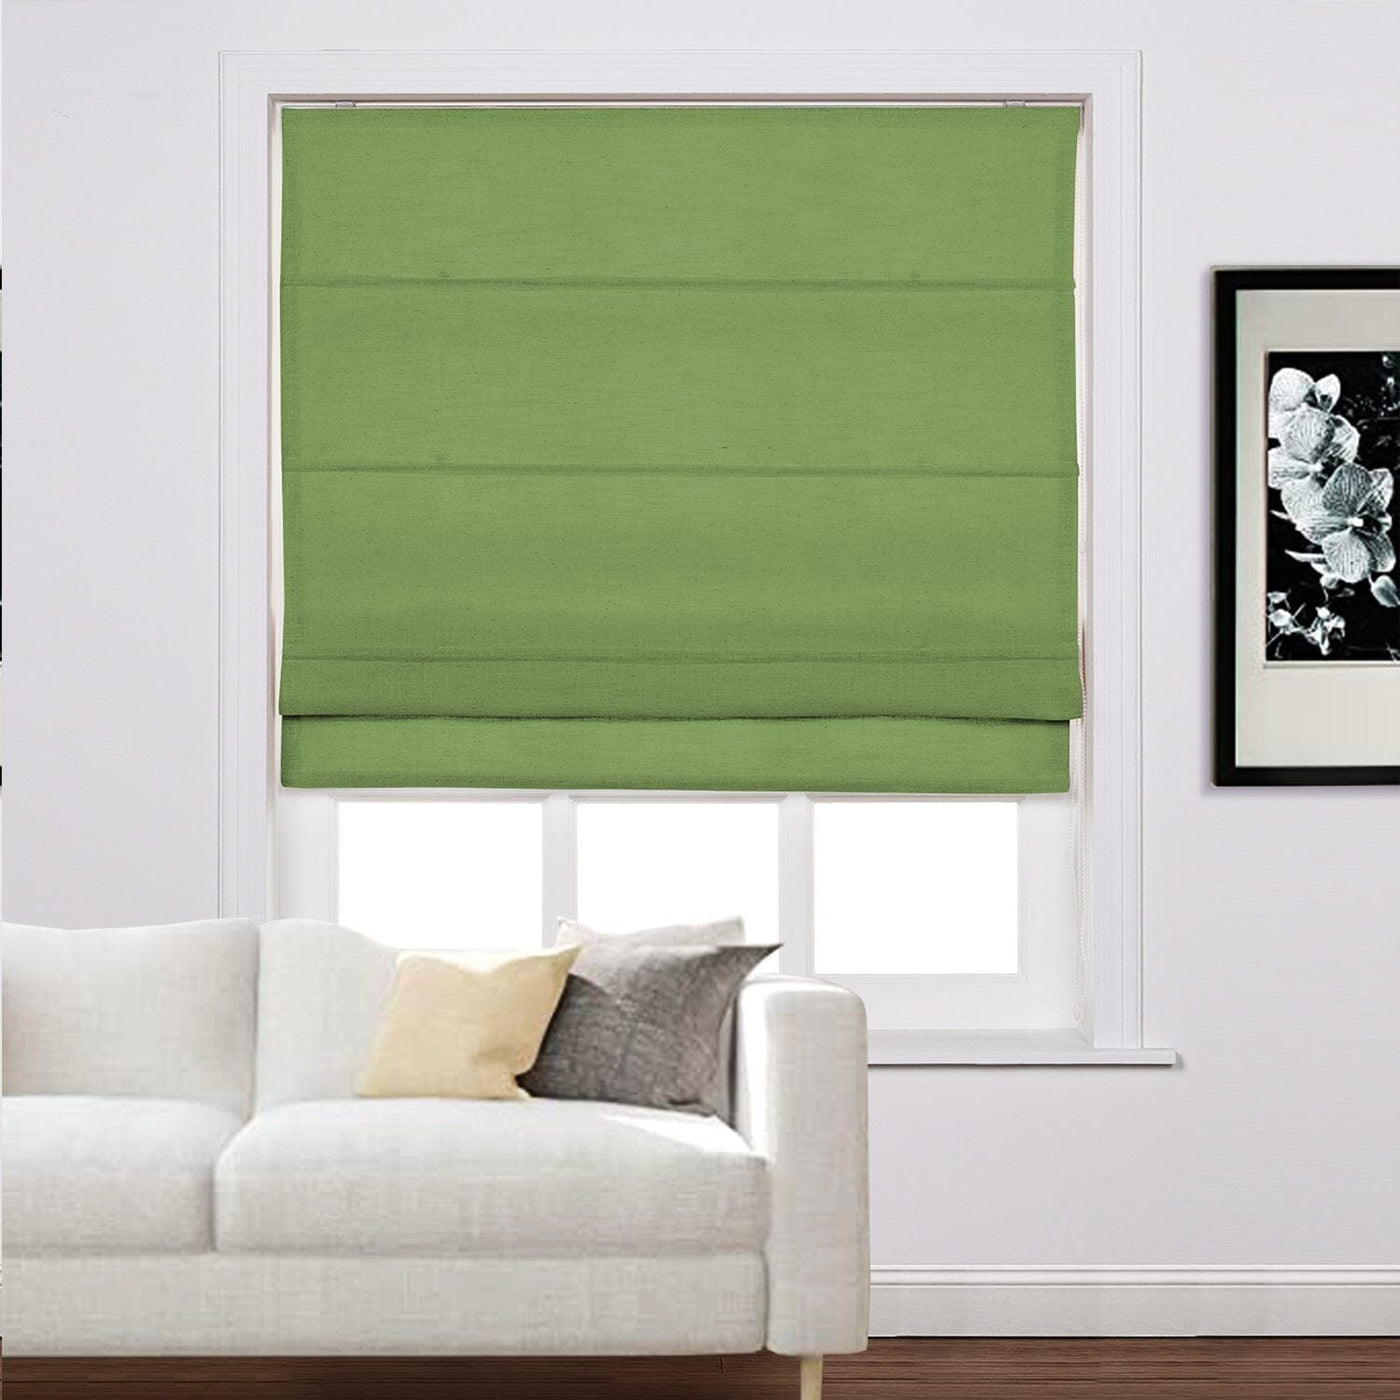 LIZ Linen Customized Roman Shade, Canvas Roman Shade with Loop Control, Kitchen Window Door Roman Shade, Install Hardware Included TWOPAGES CURTAINS Green 1908-30 